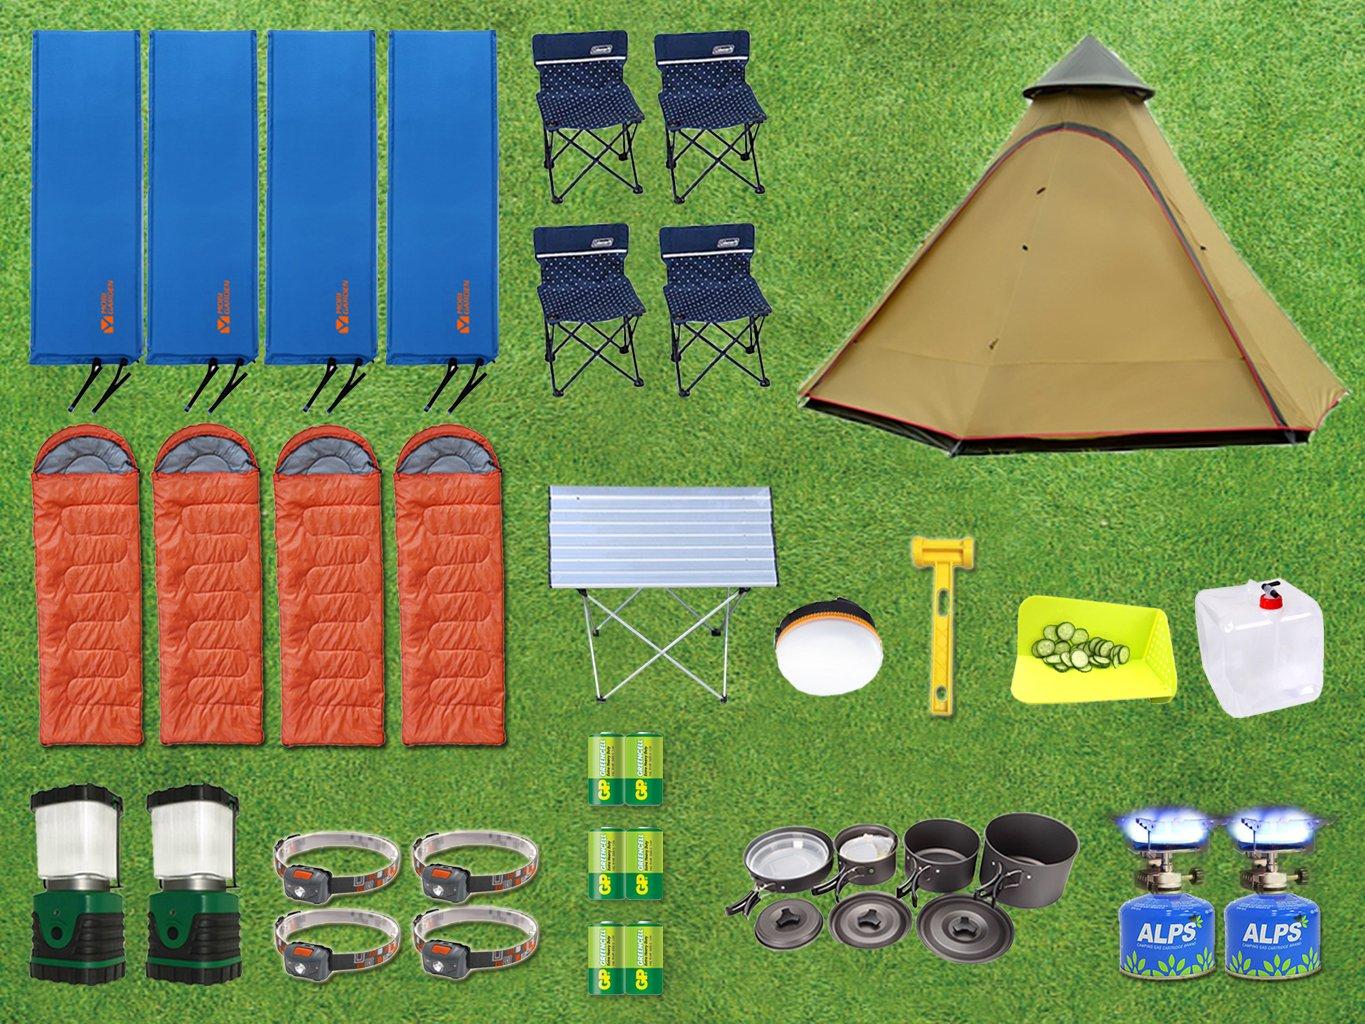 GOGO CAMP COMPANY 【Direct delivery to designated campsites】Camping Gear Rental Set for 2-4 pax 3